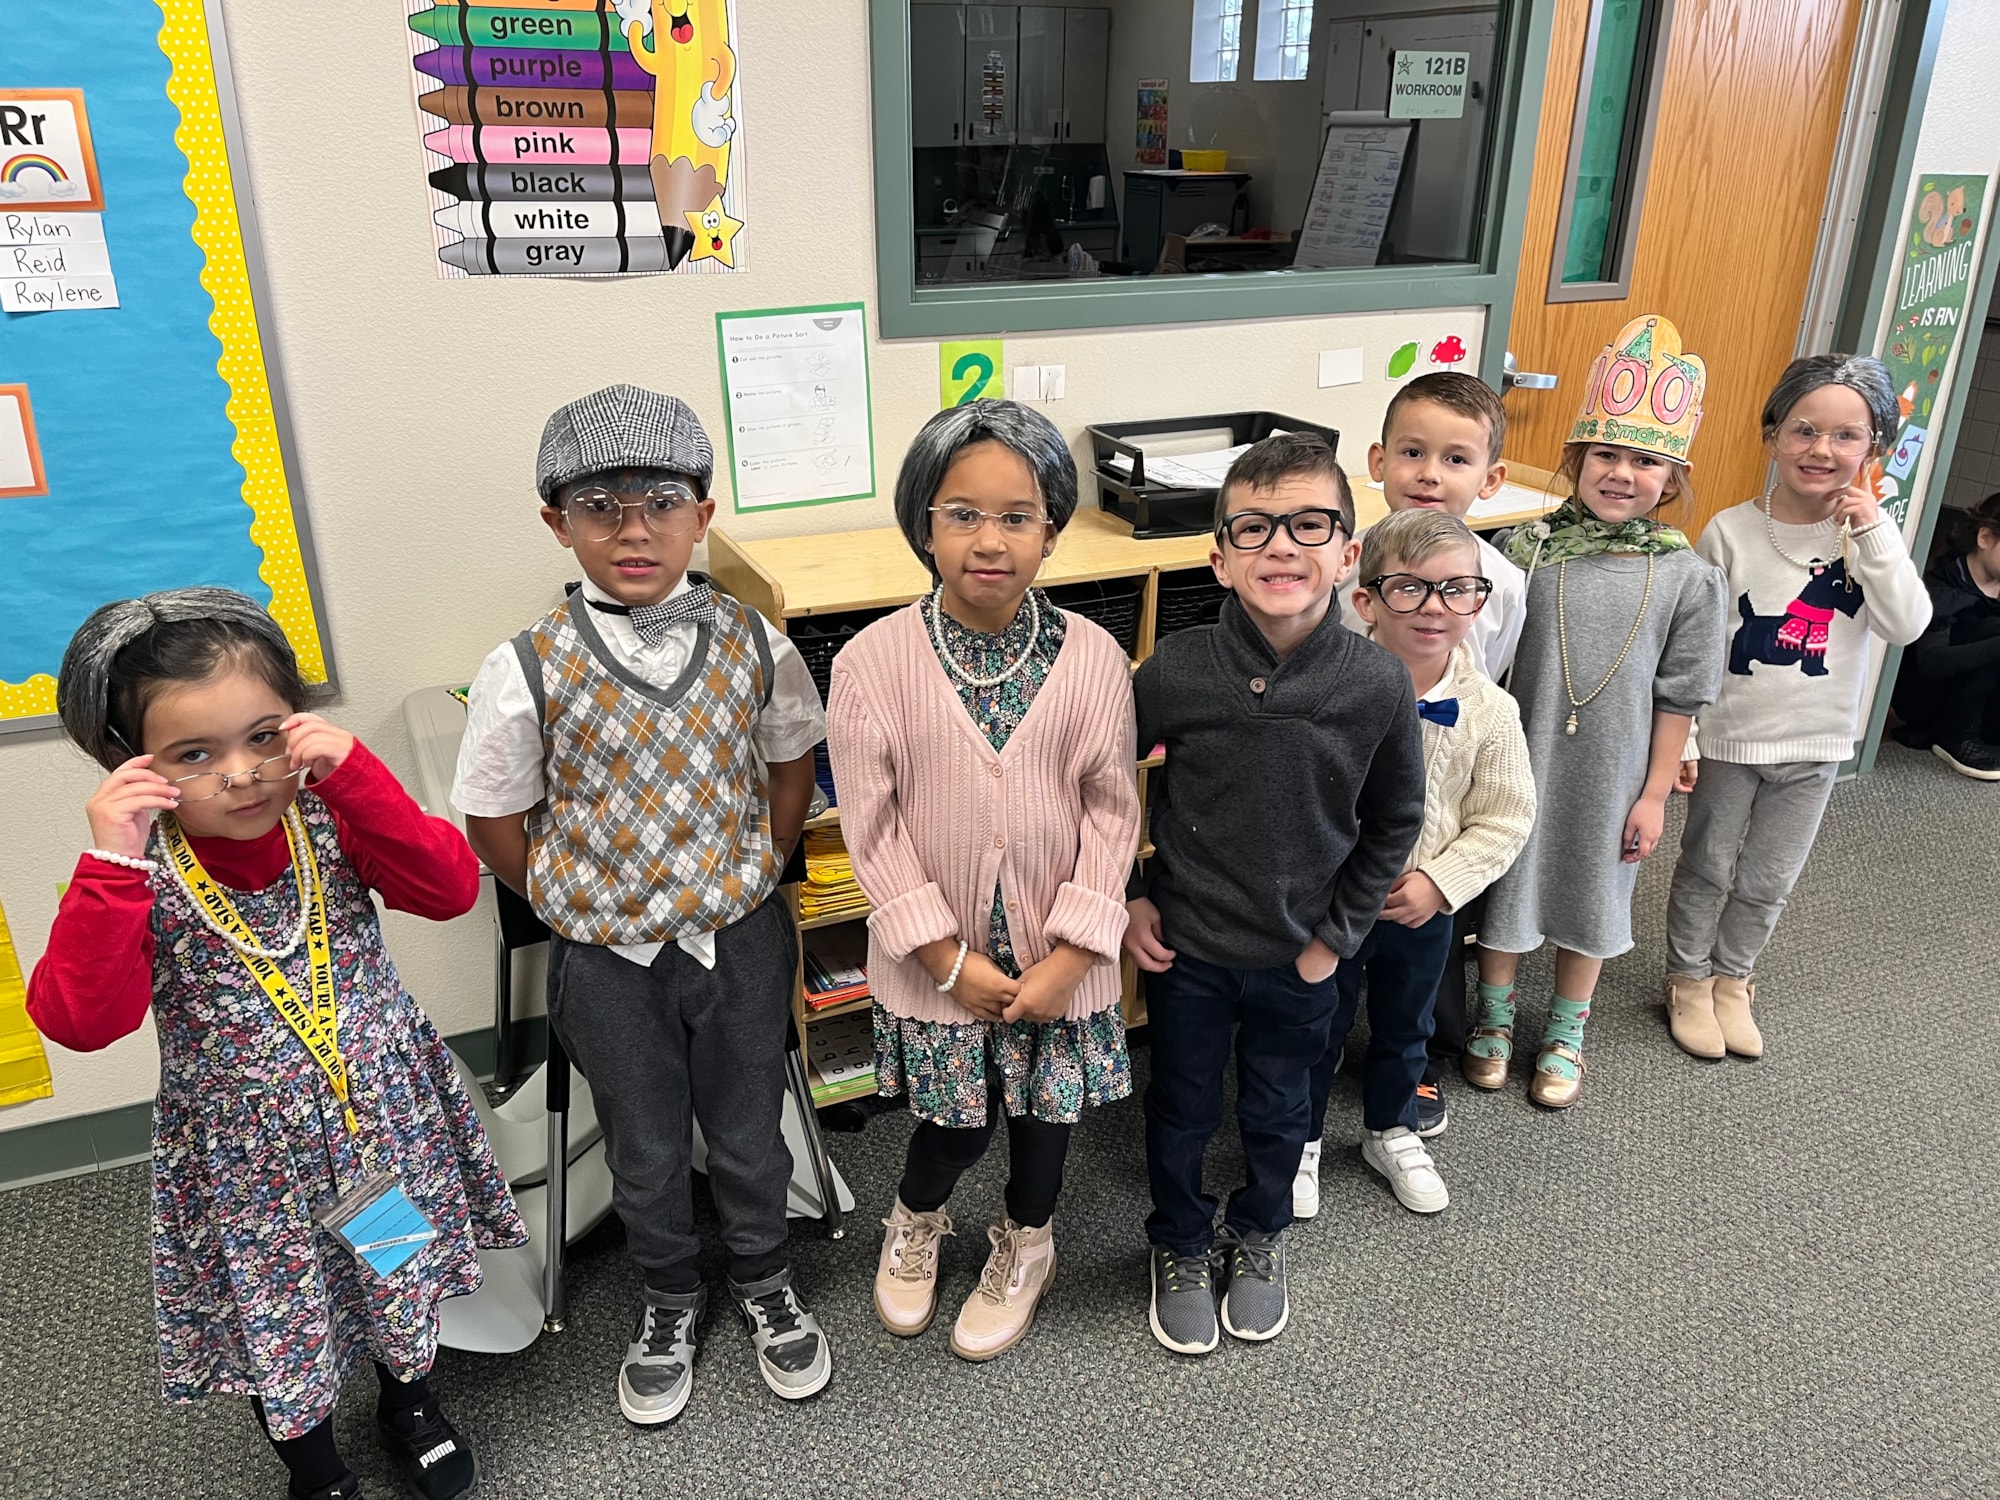 Kinder dressed as 100 year olds